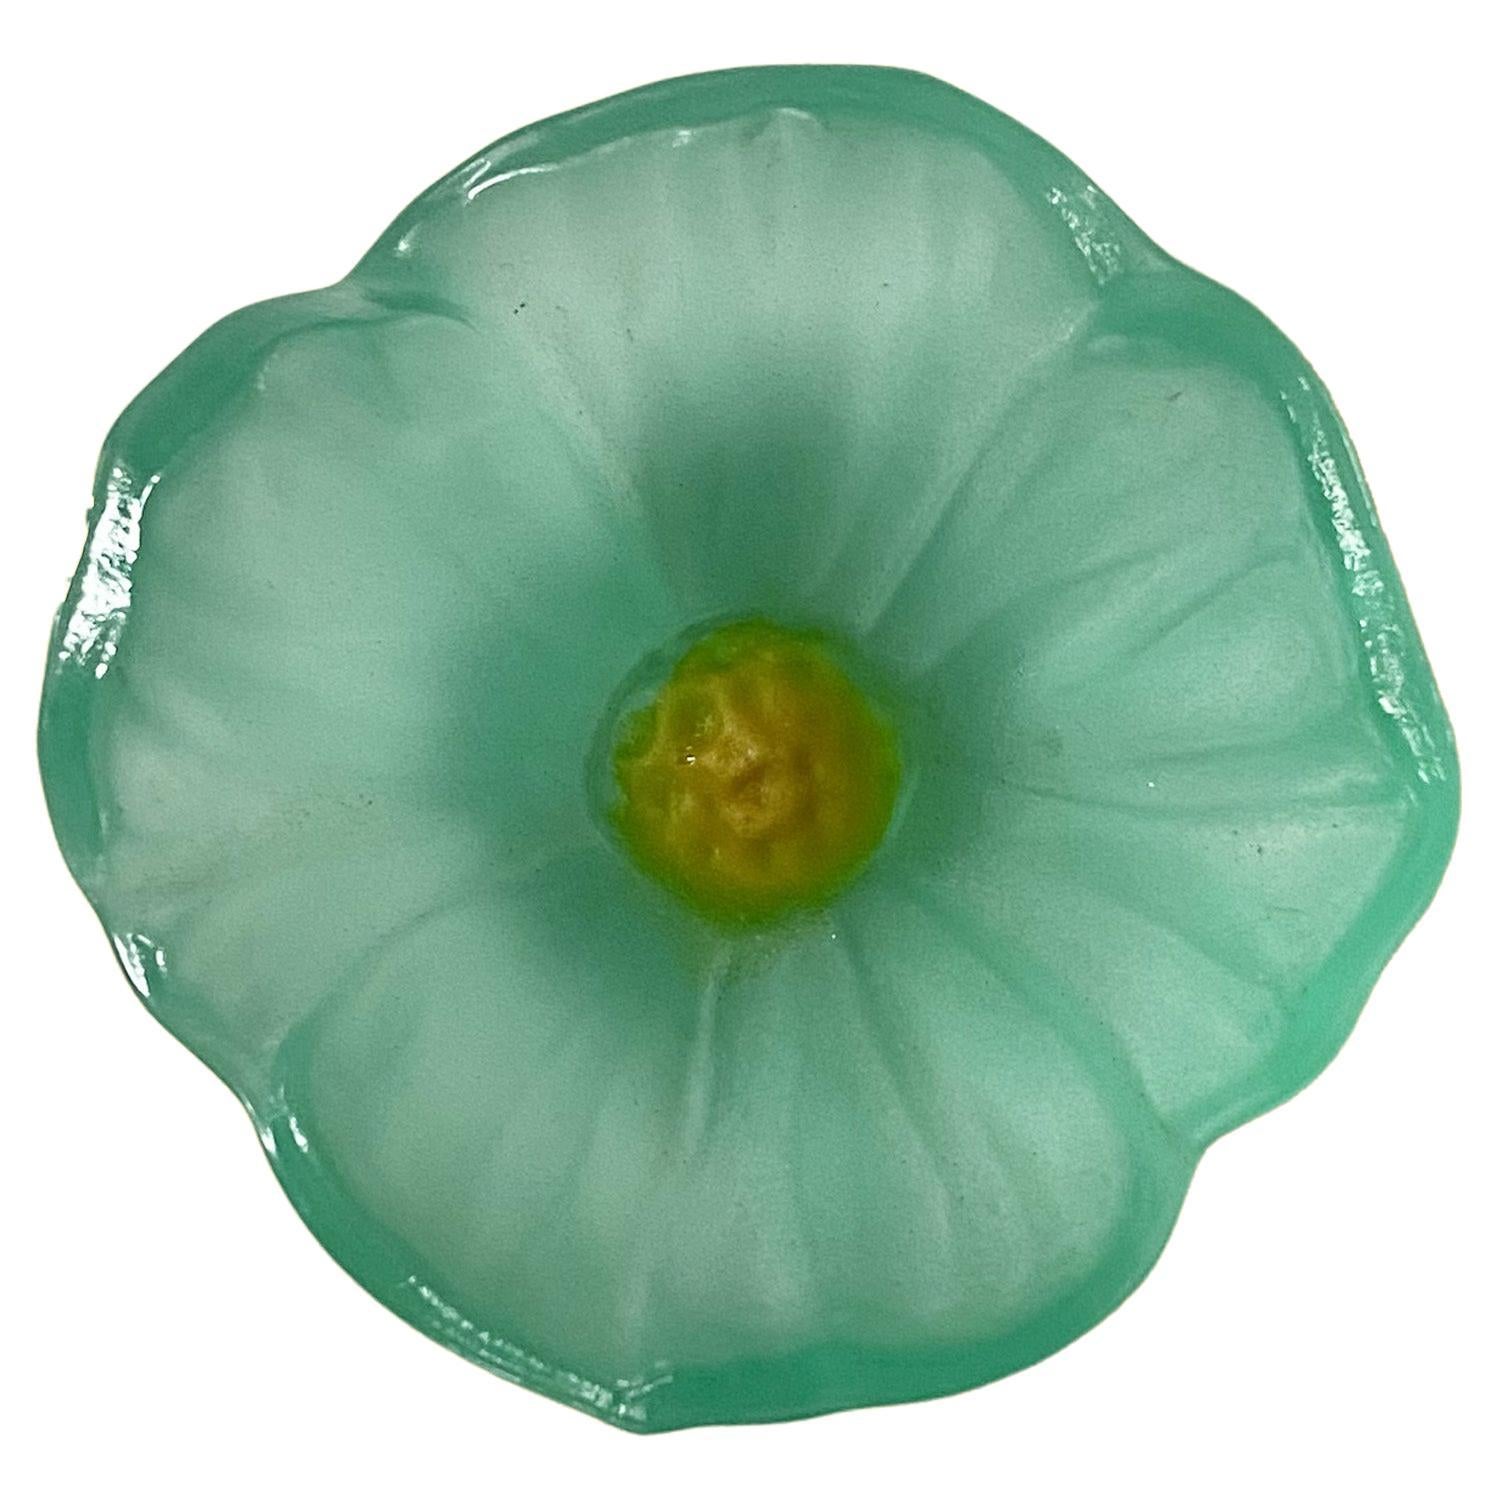 Crystal Flower Cactus Tray by Hilton McConnico for Daum, France, 1980s